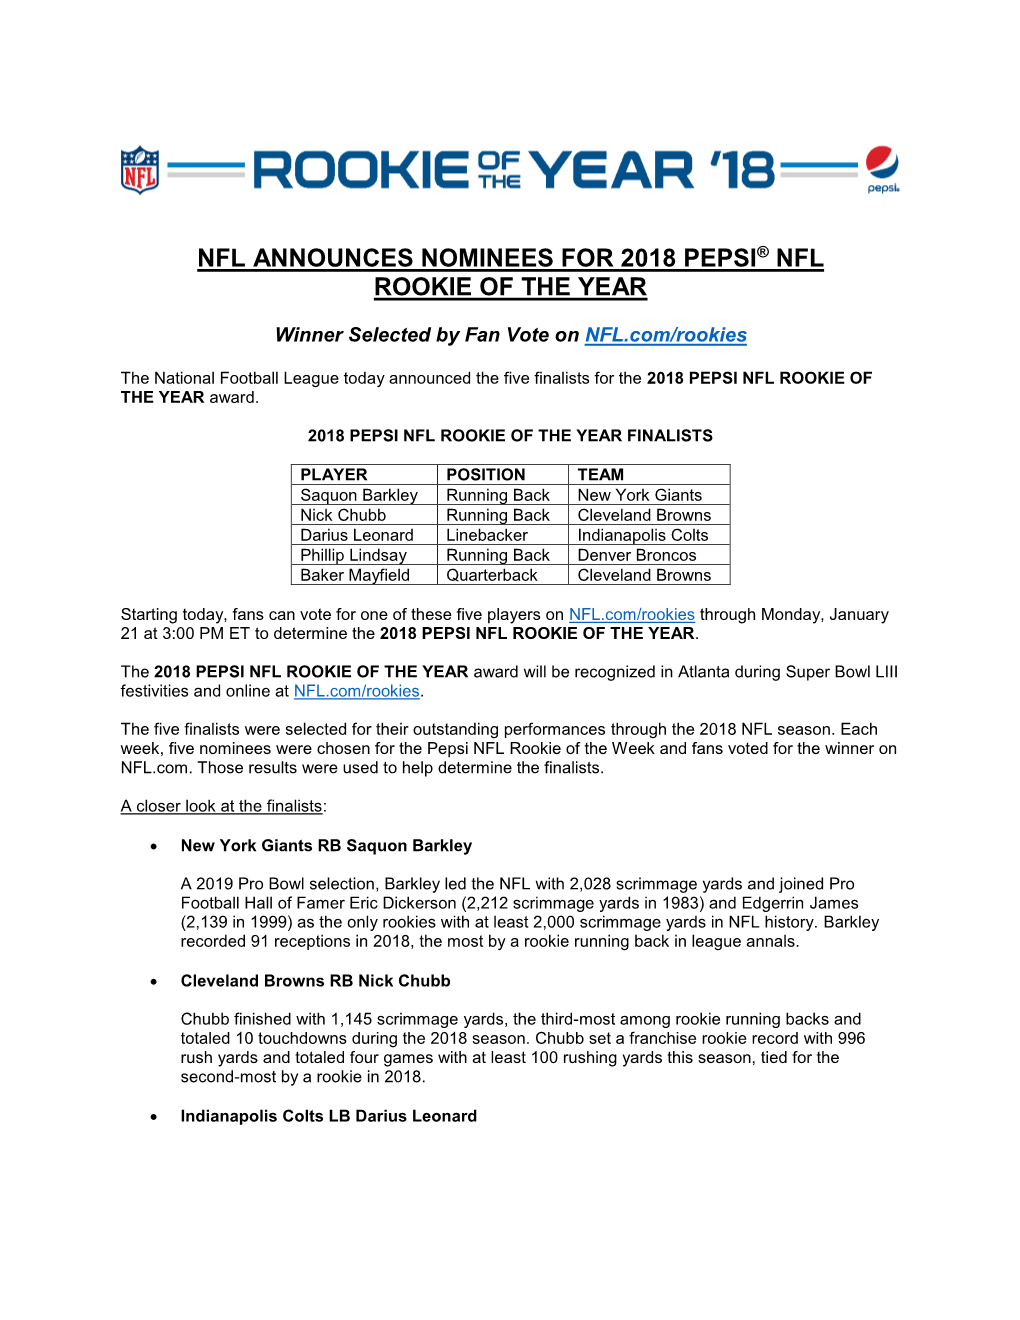 Nfl Announces Nominees for 2018 Pepsi® Nfl Rookie of the Year